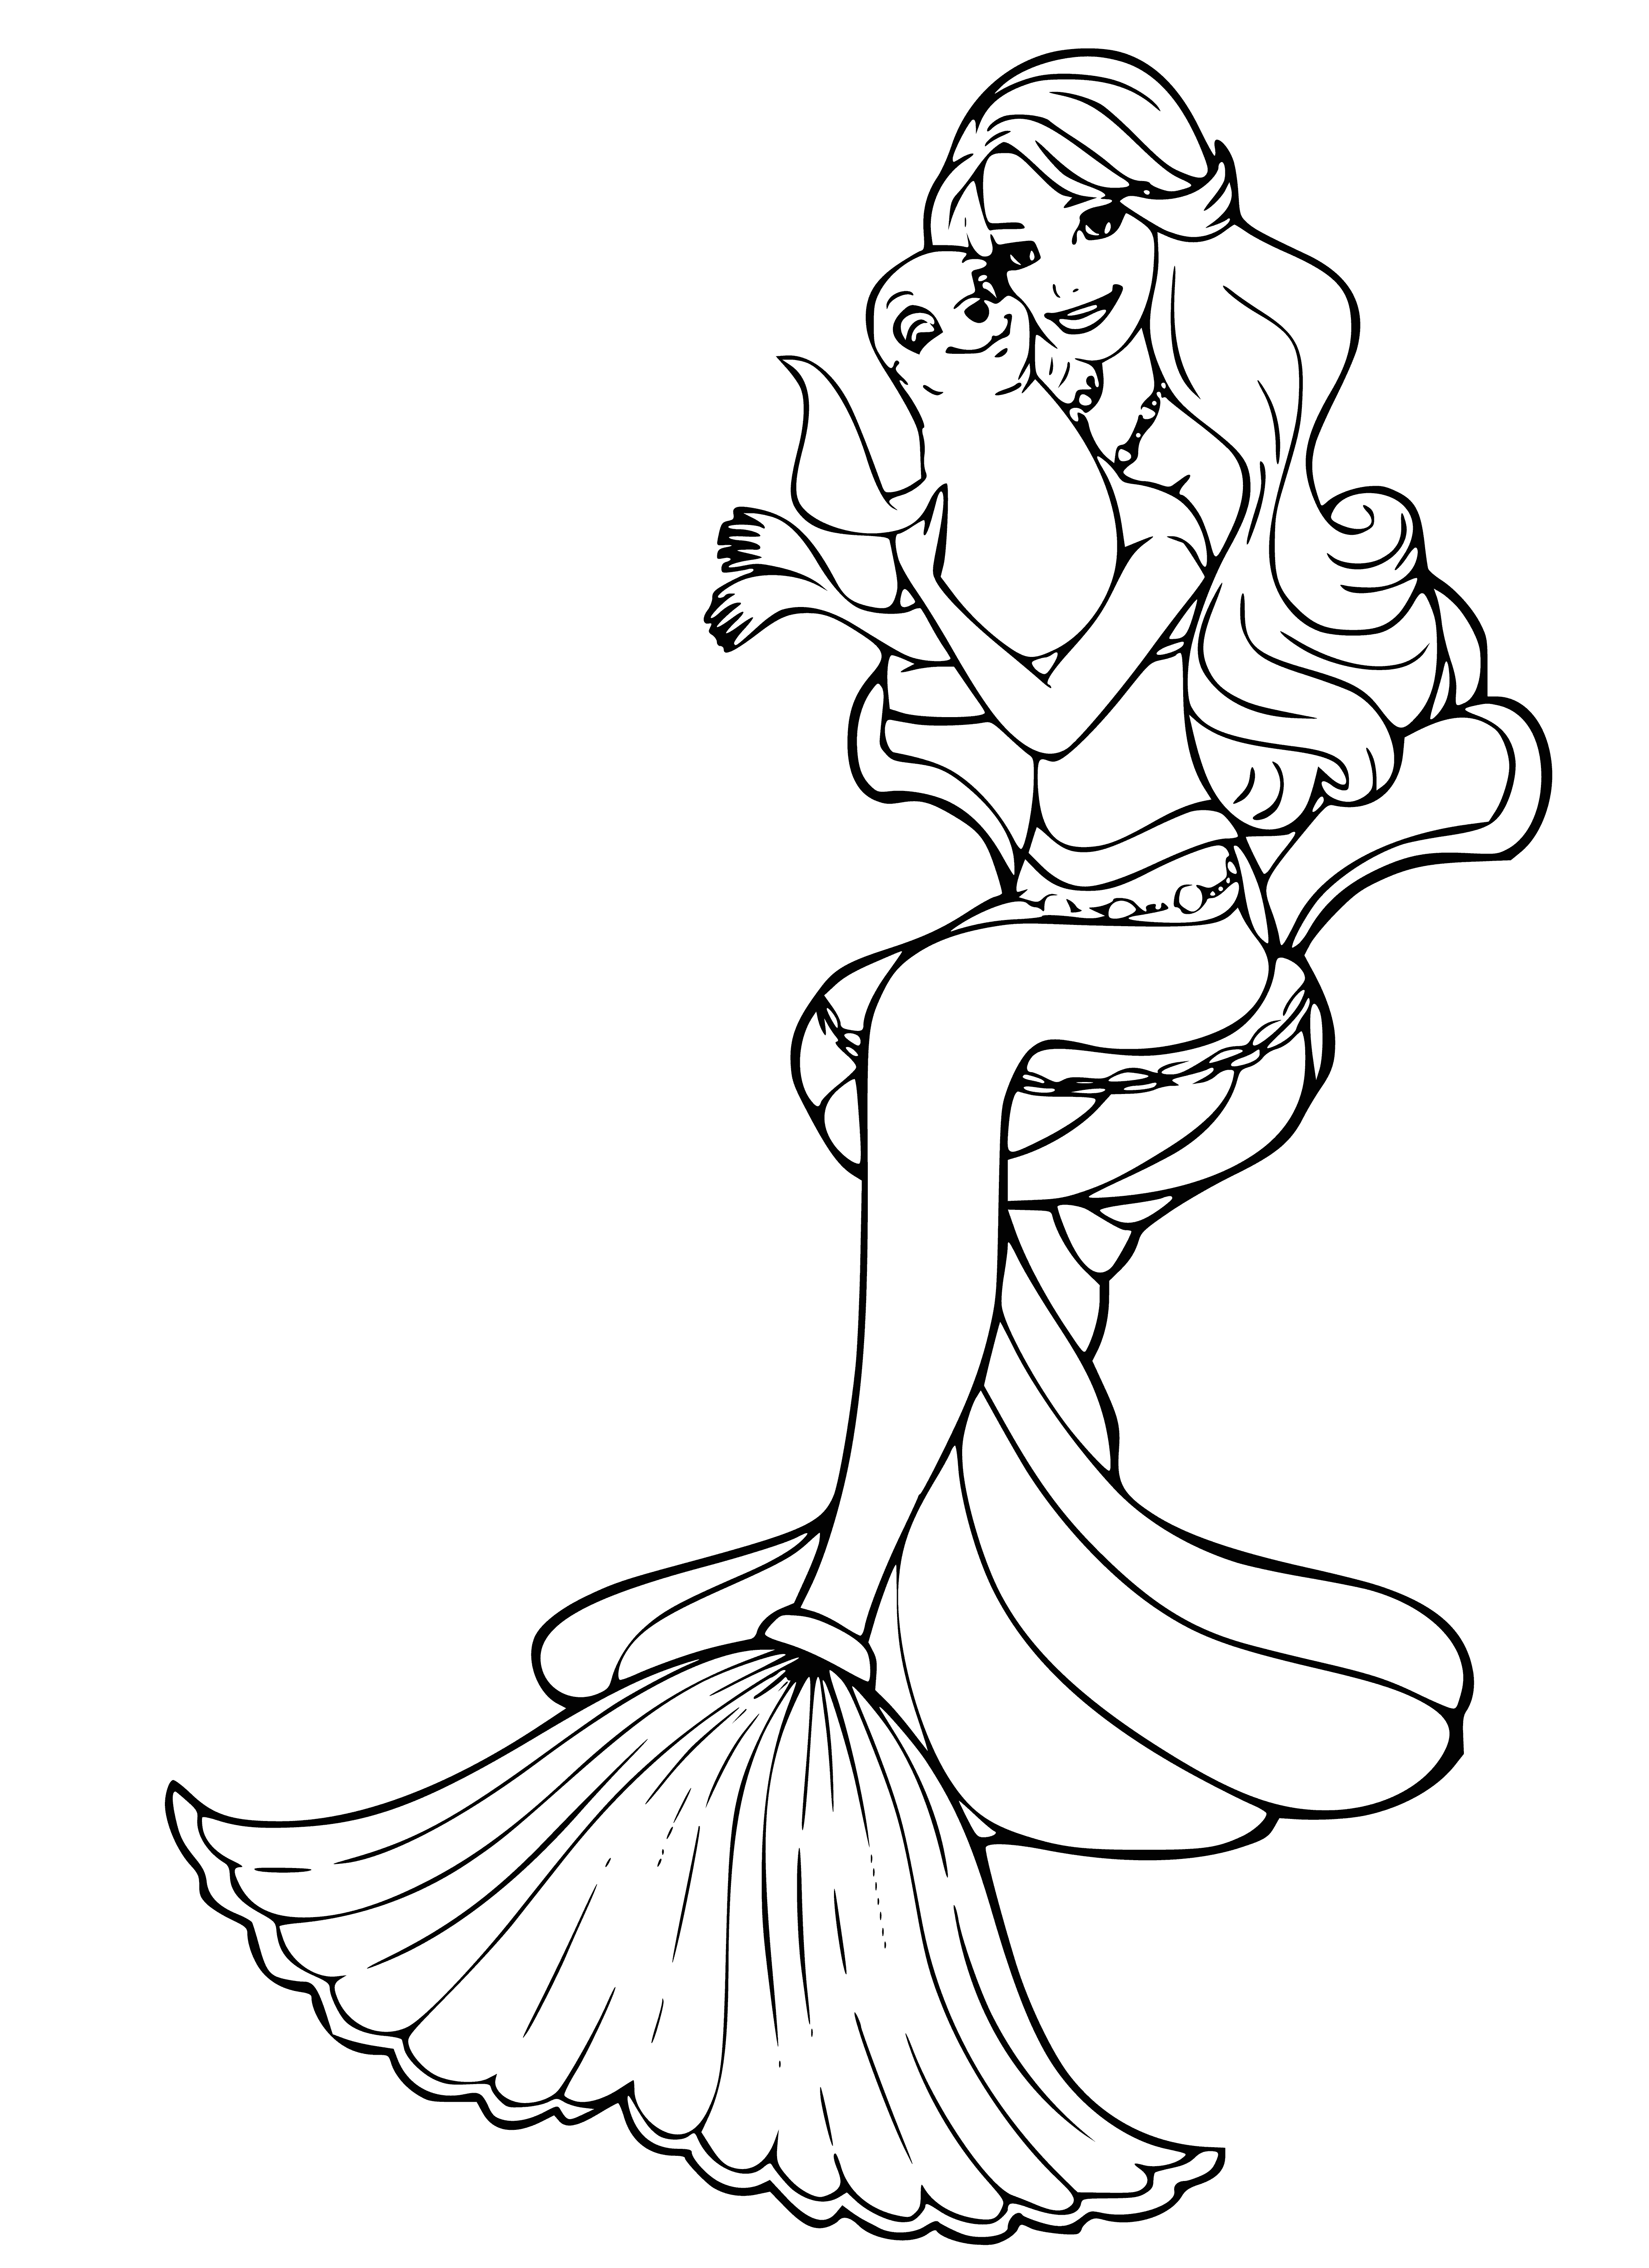 coloring page: Mermaid princess is serenely swimming in the ocean, wearing a shells bikini & pearl necklace with long blonde hair & a blue tail.